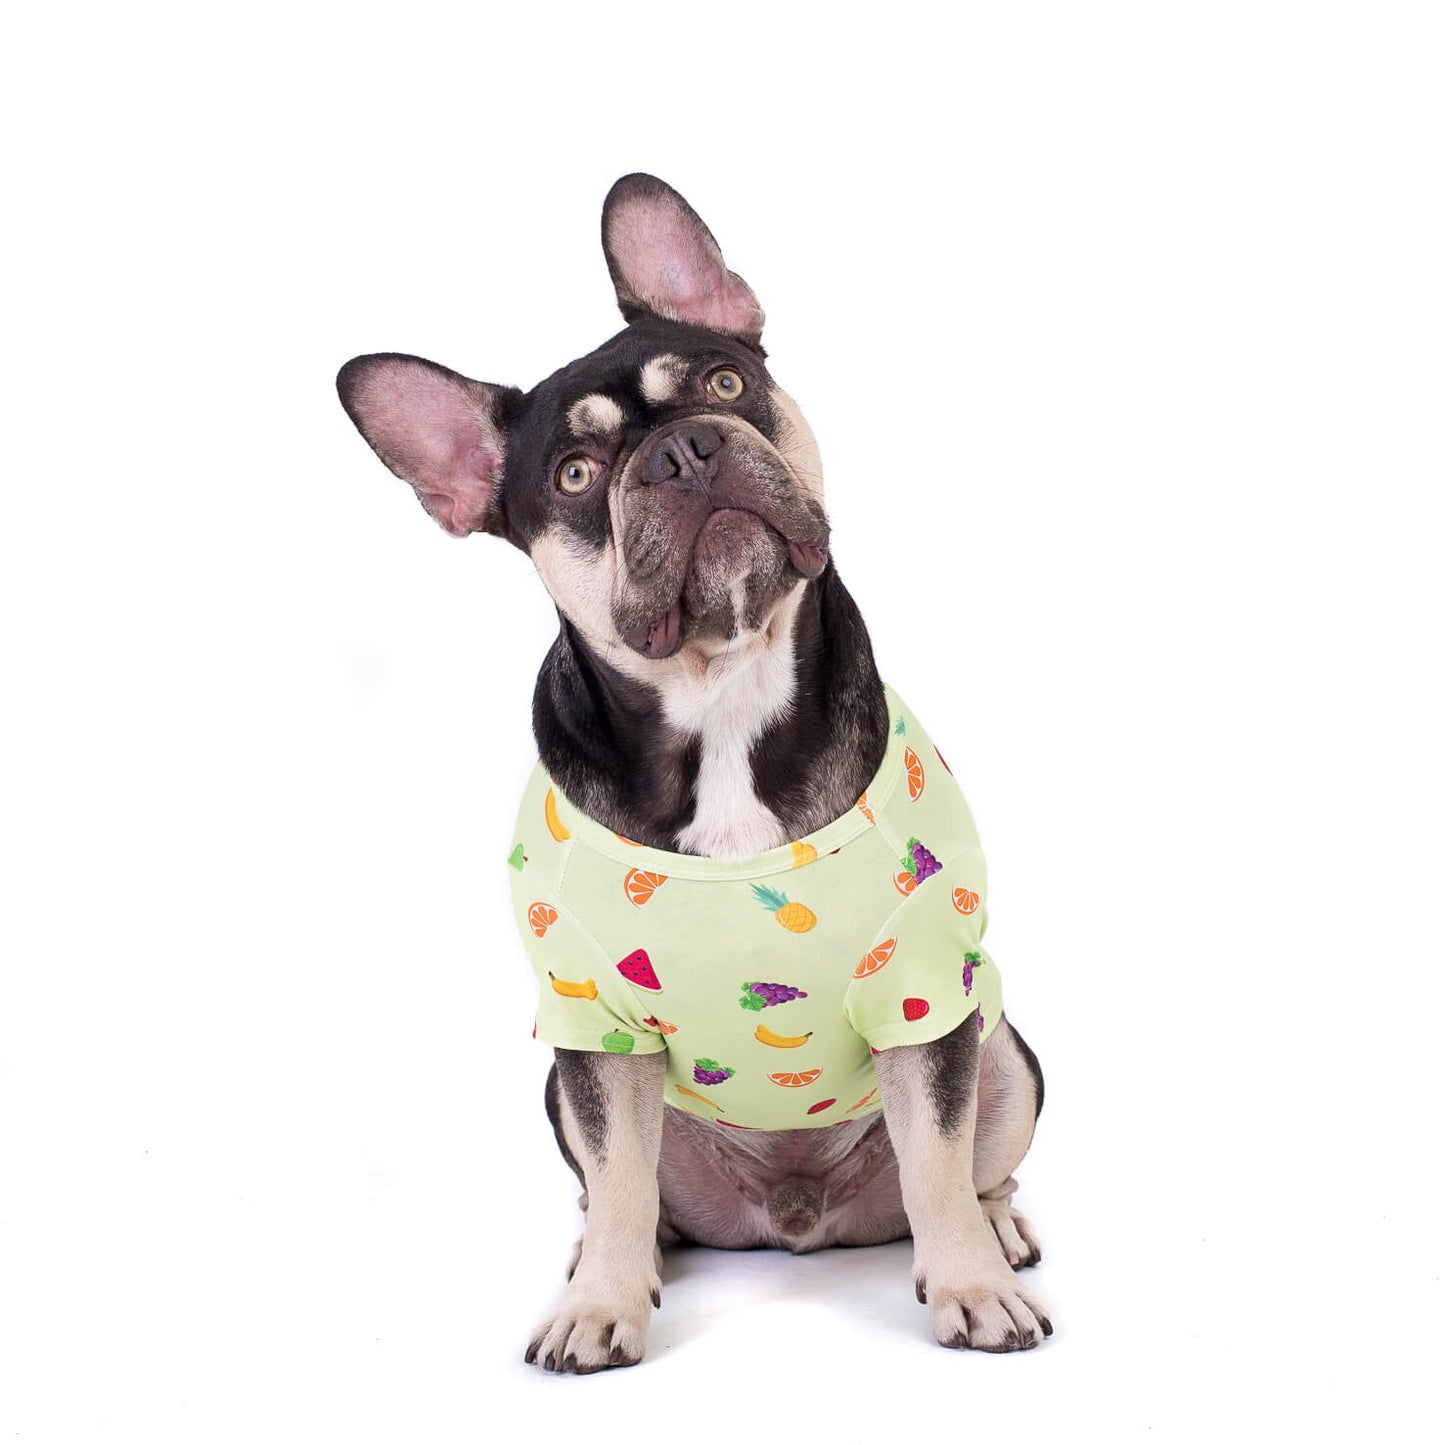 A lovable French Bulldog capturing hearts with an endearing head tilt, exuding charm and curiosity while donning a Feelin'Fruity dog shirt that adds a touch of playful style to their adorable pose.